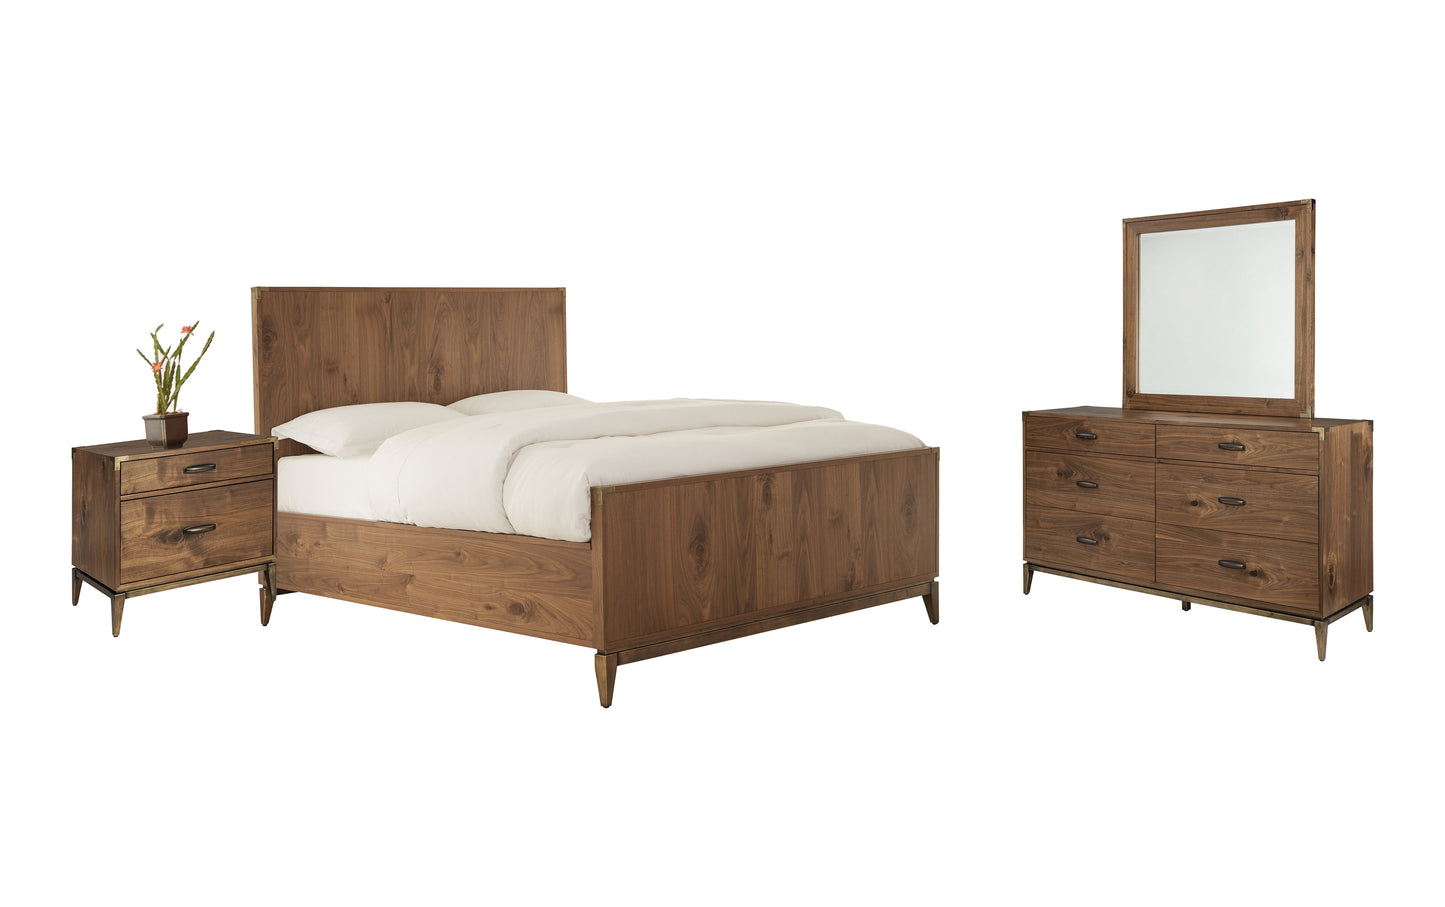 Modus Adler 4PC E King Bedroom Set with Nightstand in Natural Walnut